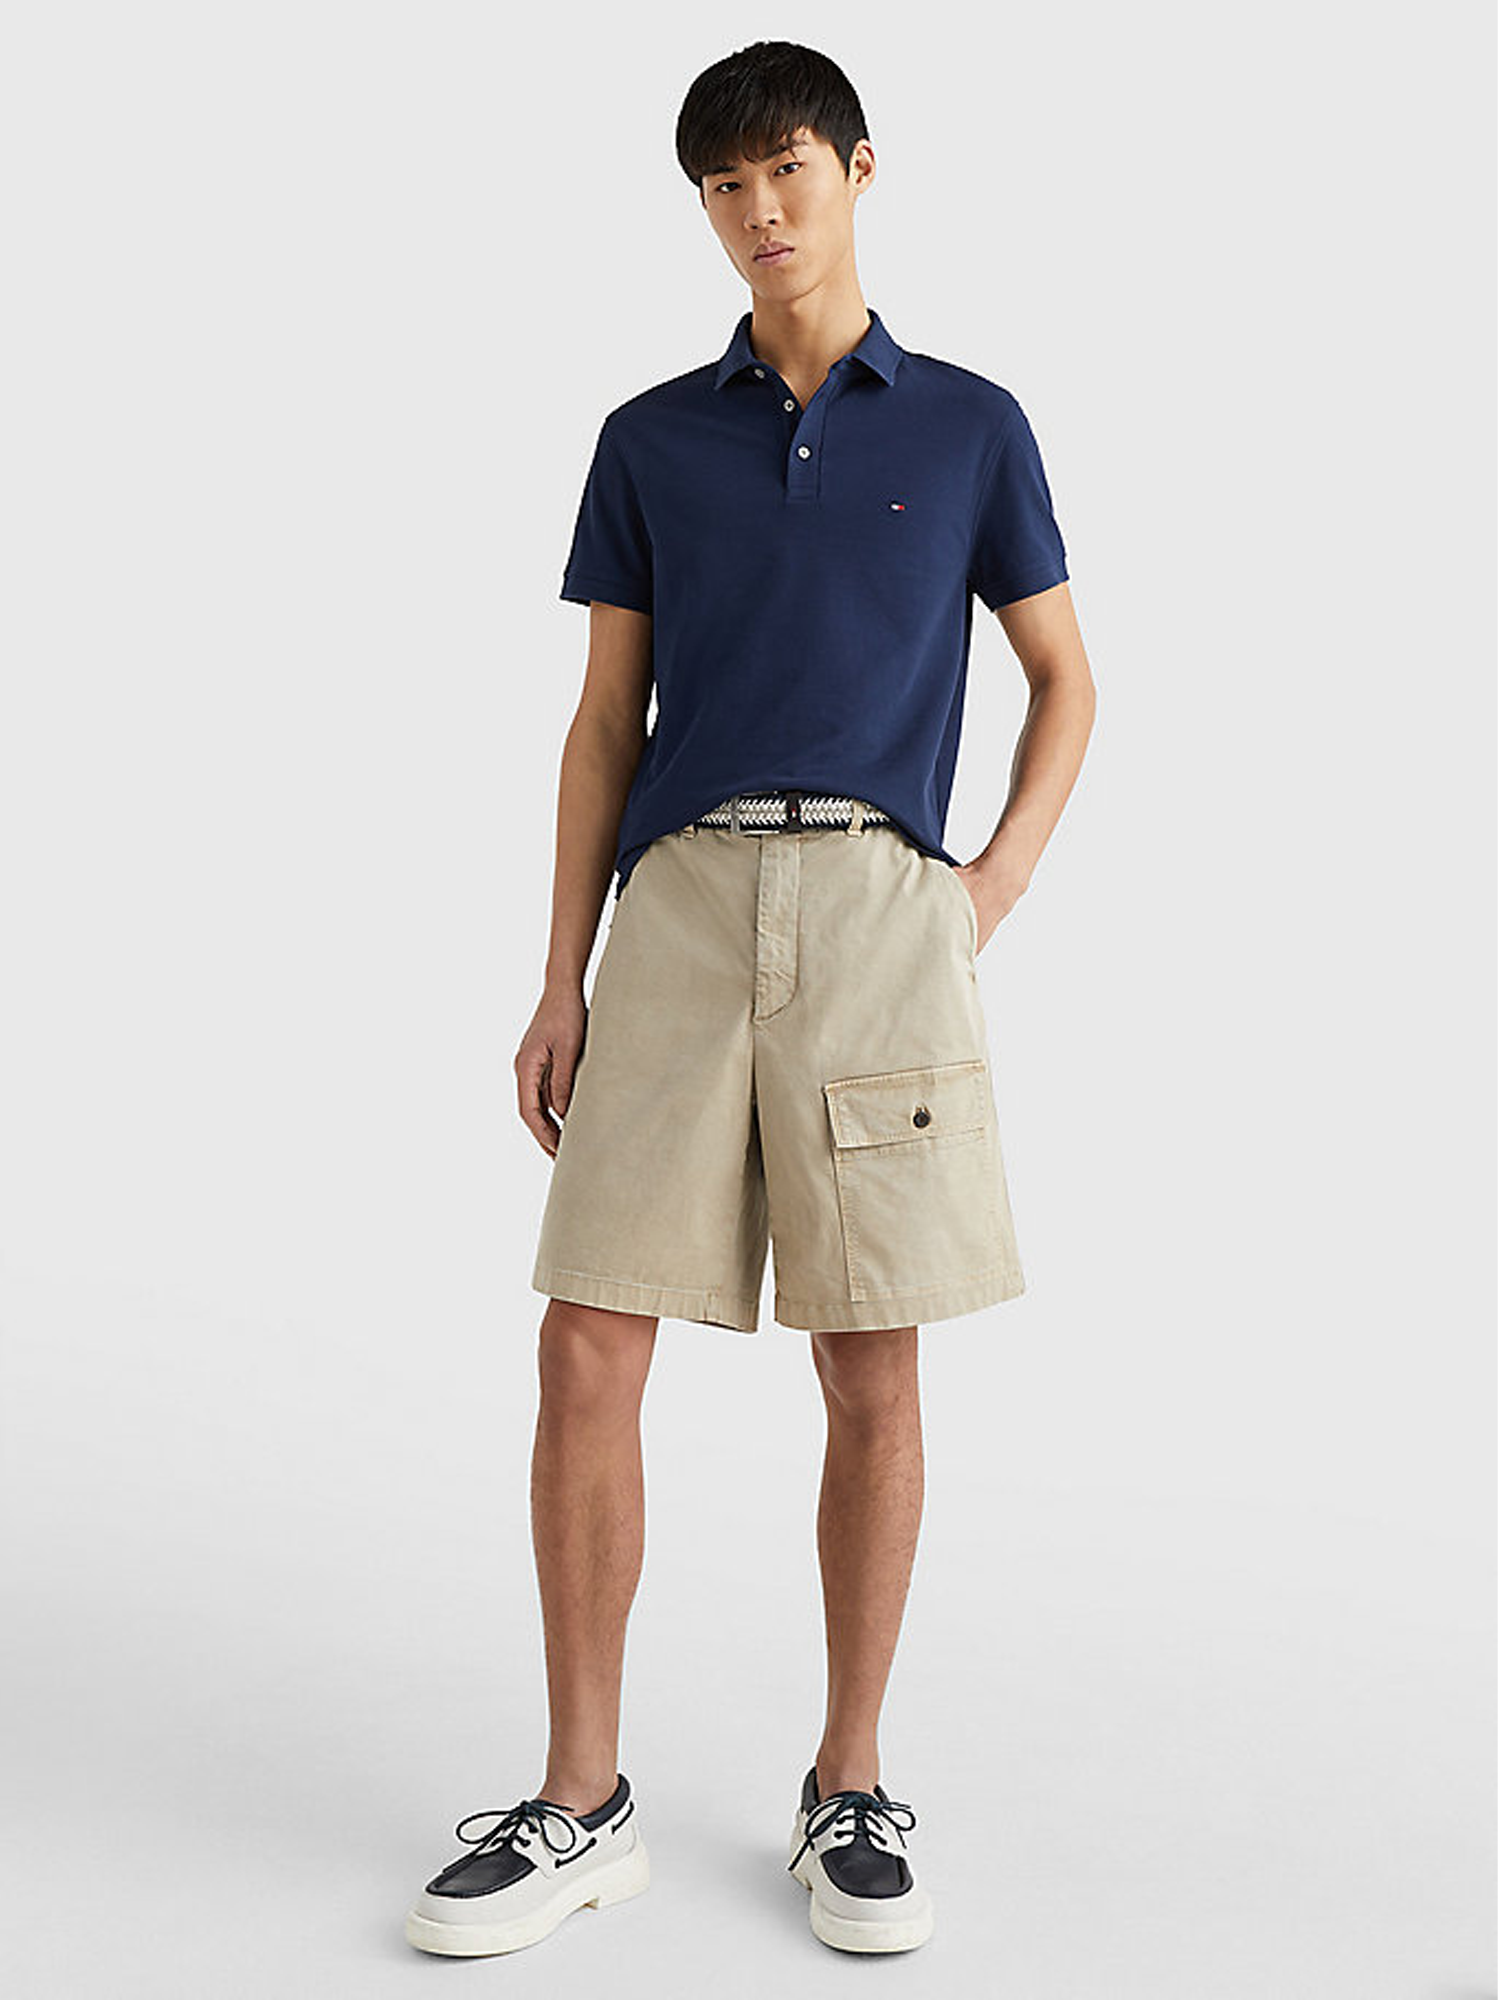 Tommy Hilfiger 1985 Collection Piqué Stretch Polo Navy - Heren